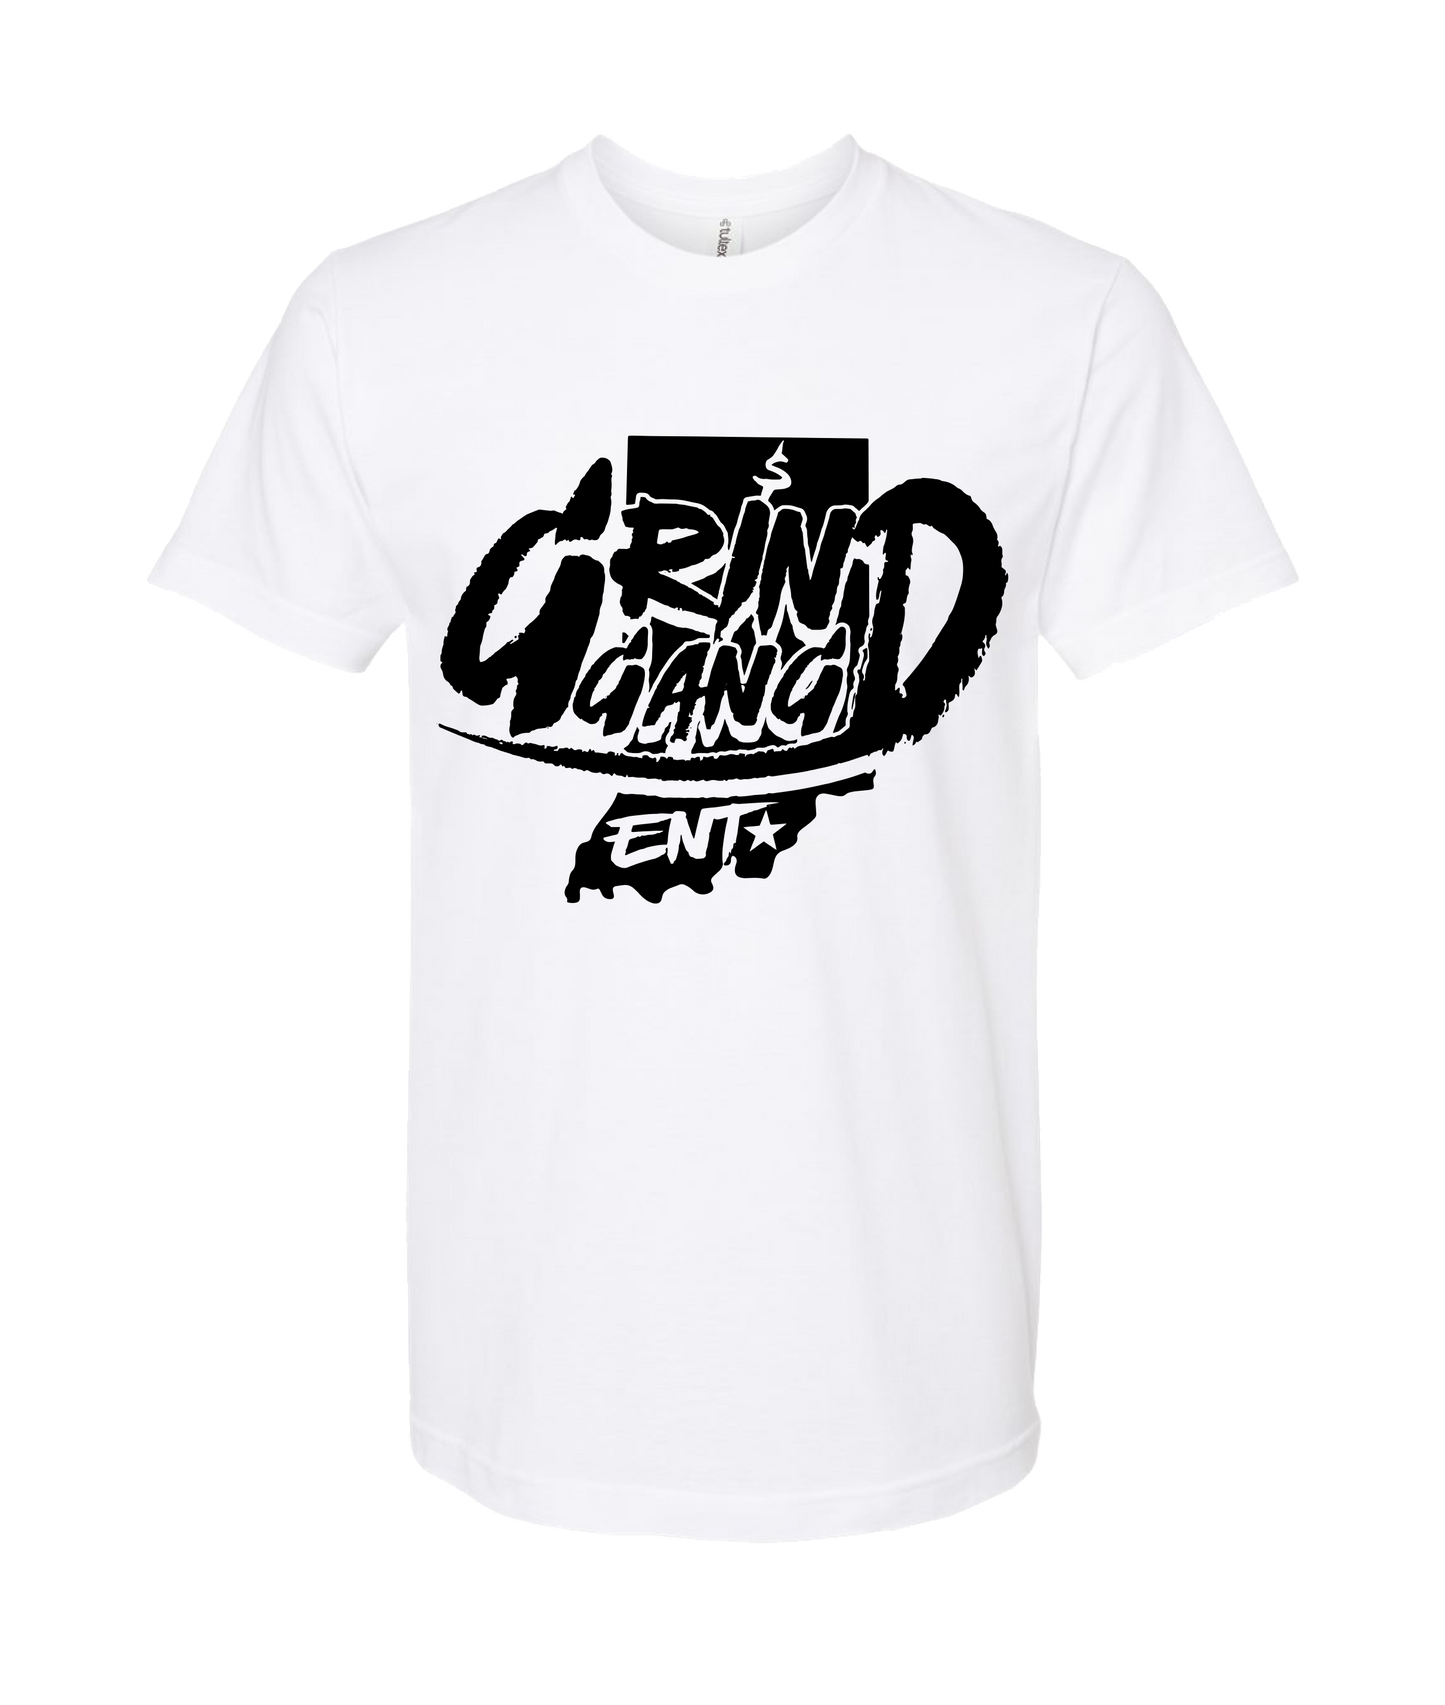 V-GGETOP - INDIANA GRIND 2 - White T-Shirt